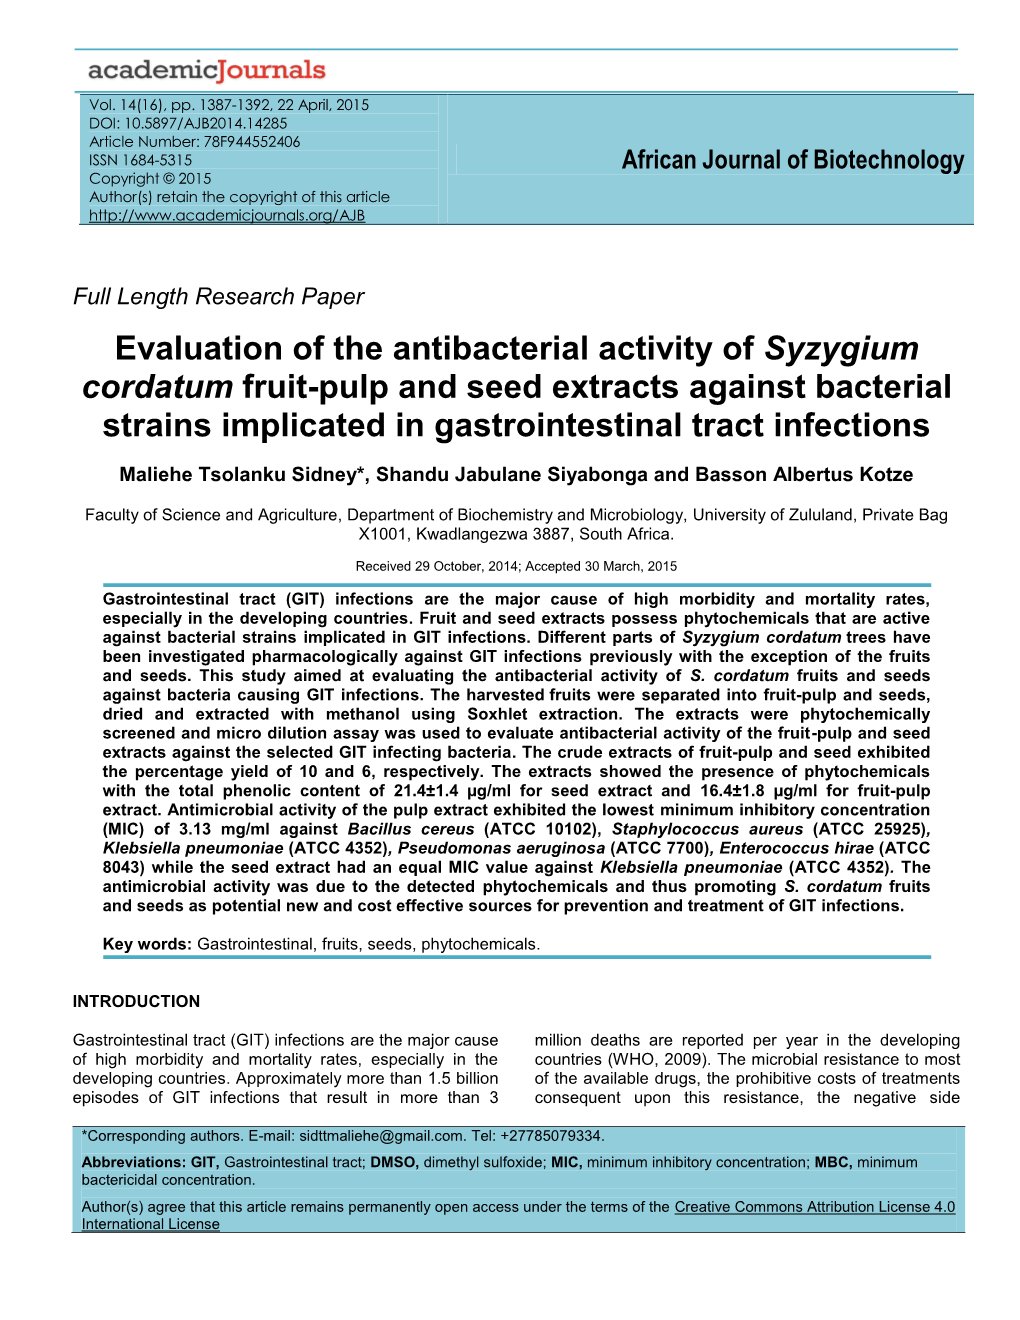 Evaluation of the Antibacterial Activity of Syzygium Cordatum Fruit-Pulp and Seed Extracts Against Bacterial Strains Implicated in Gastrointestinal Tract Infections